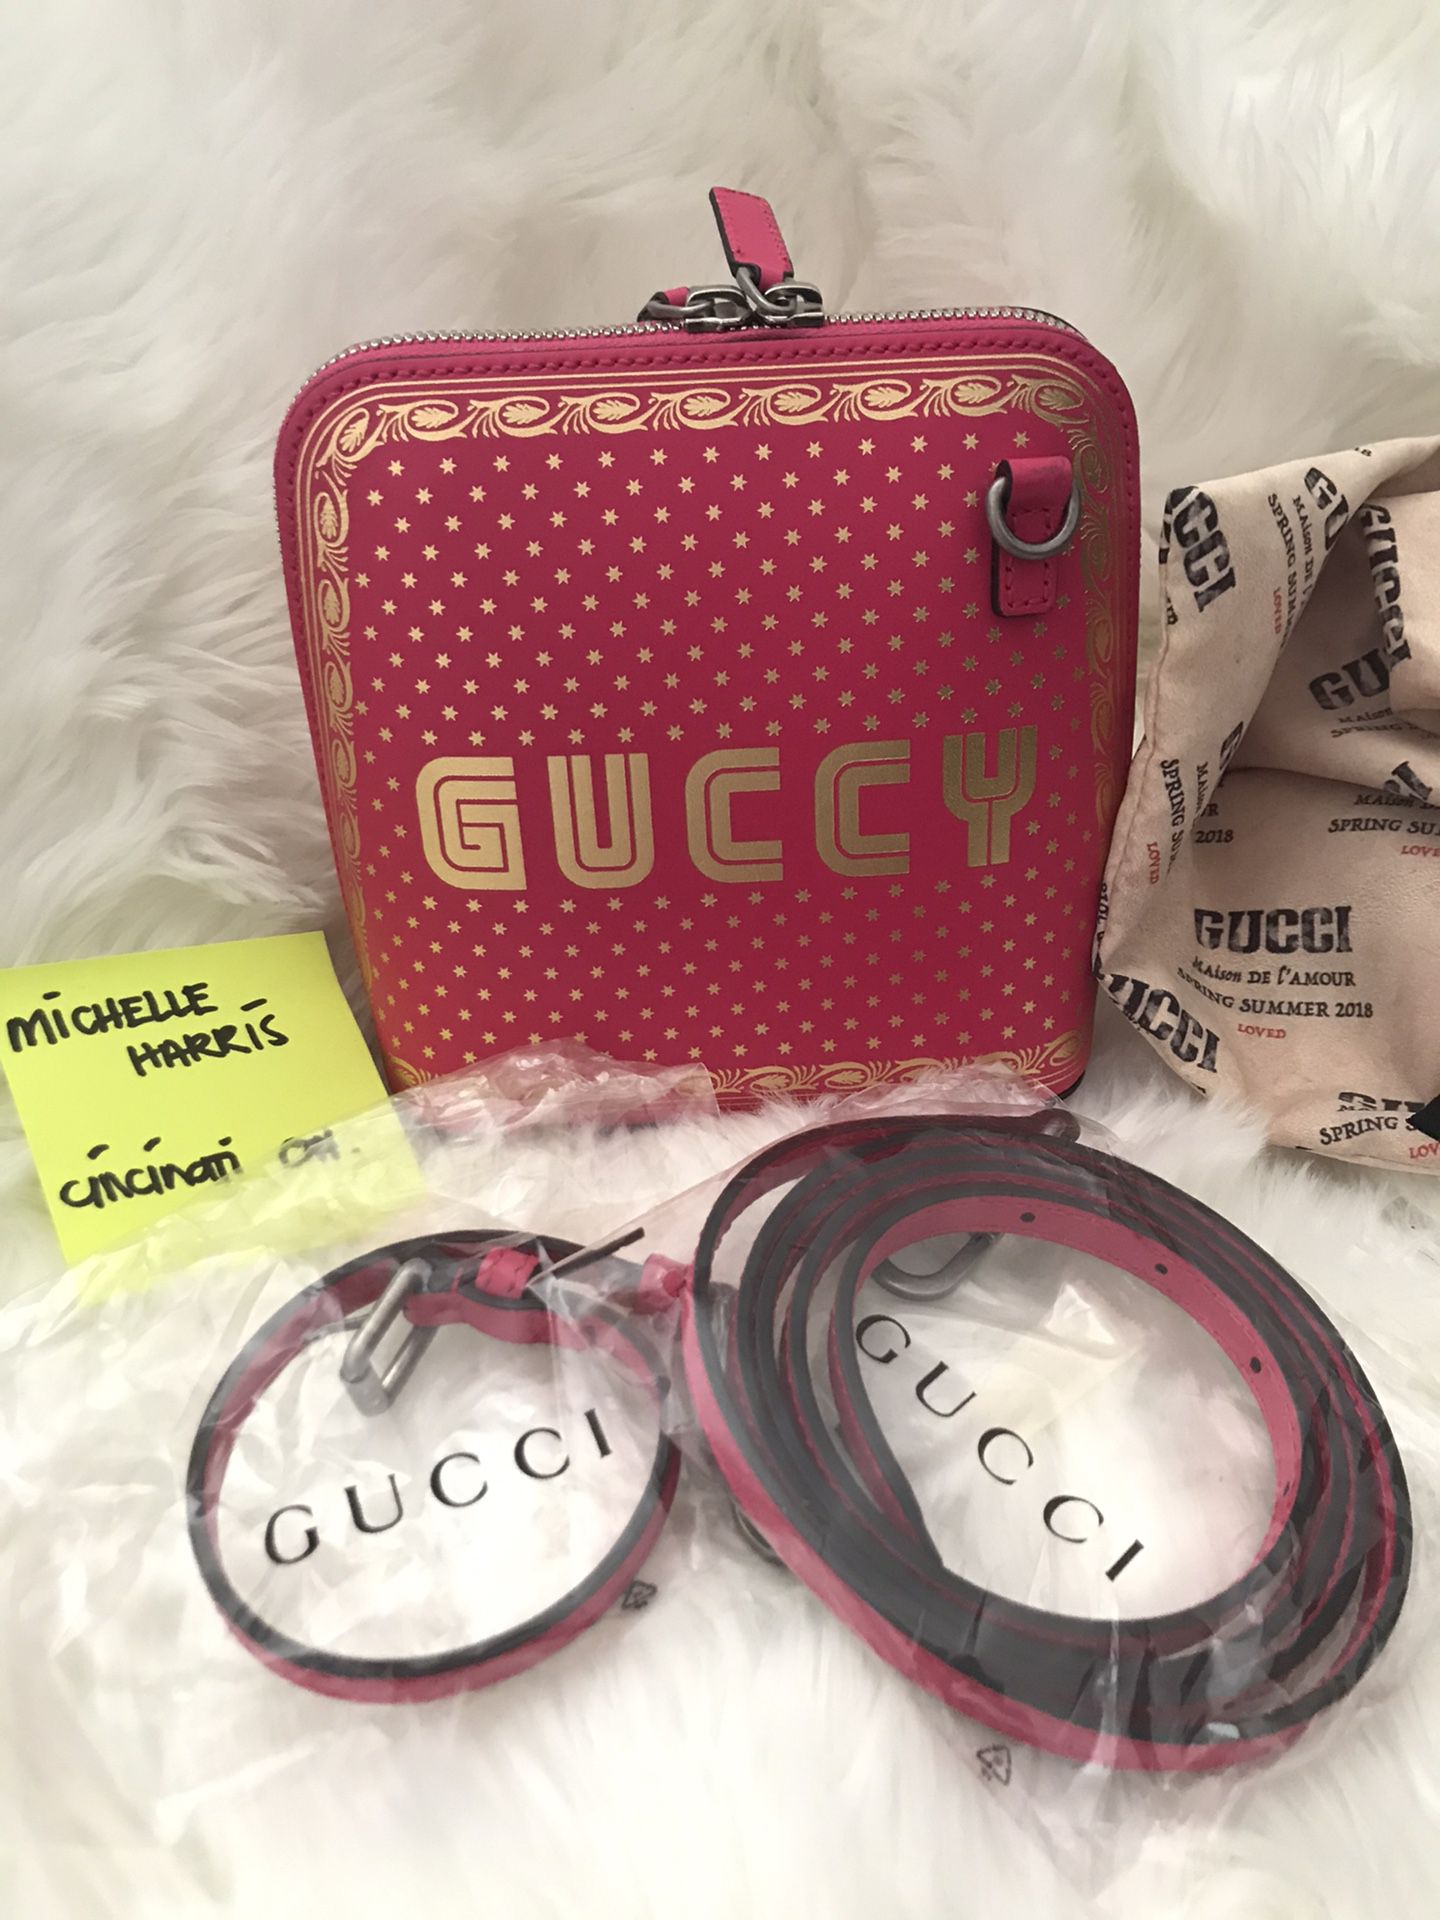 Authentic Gucci Guccy crossbody bag